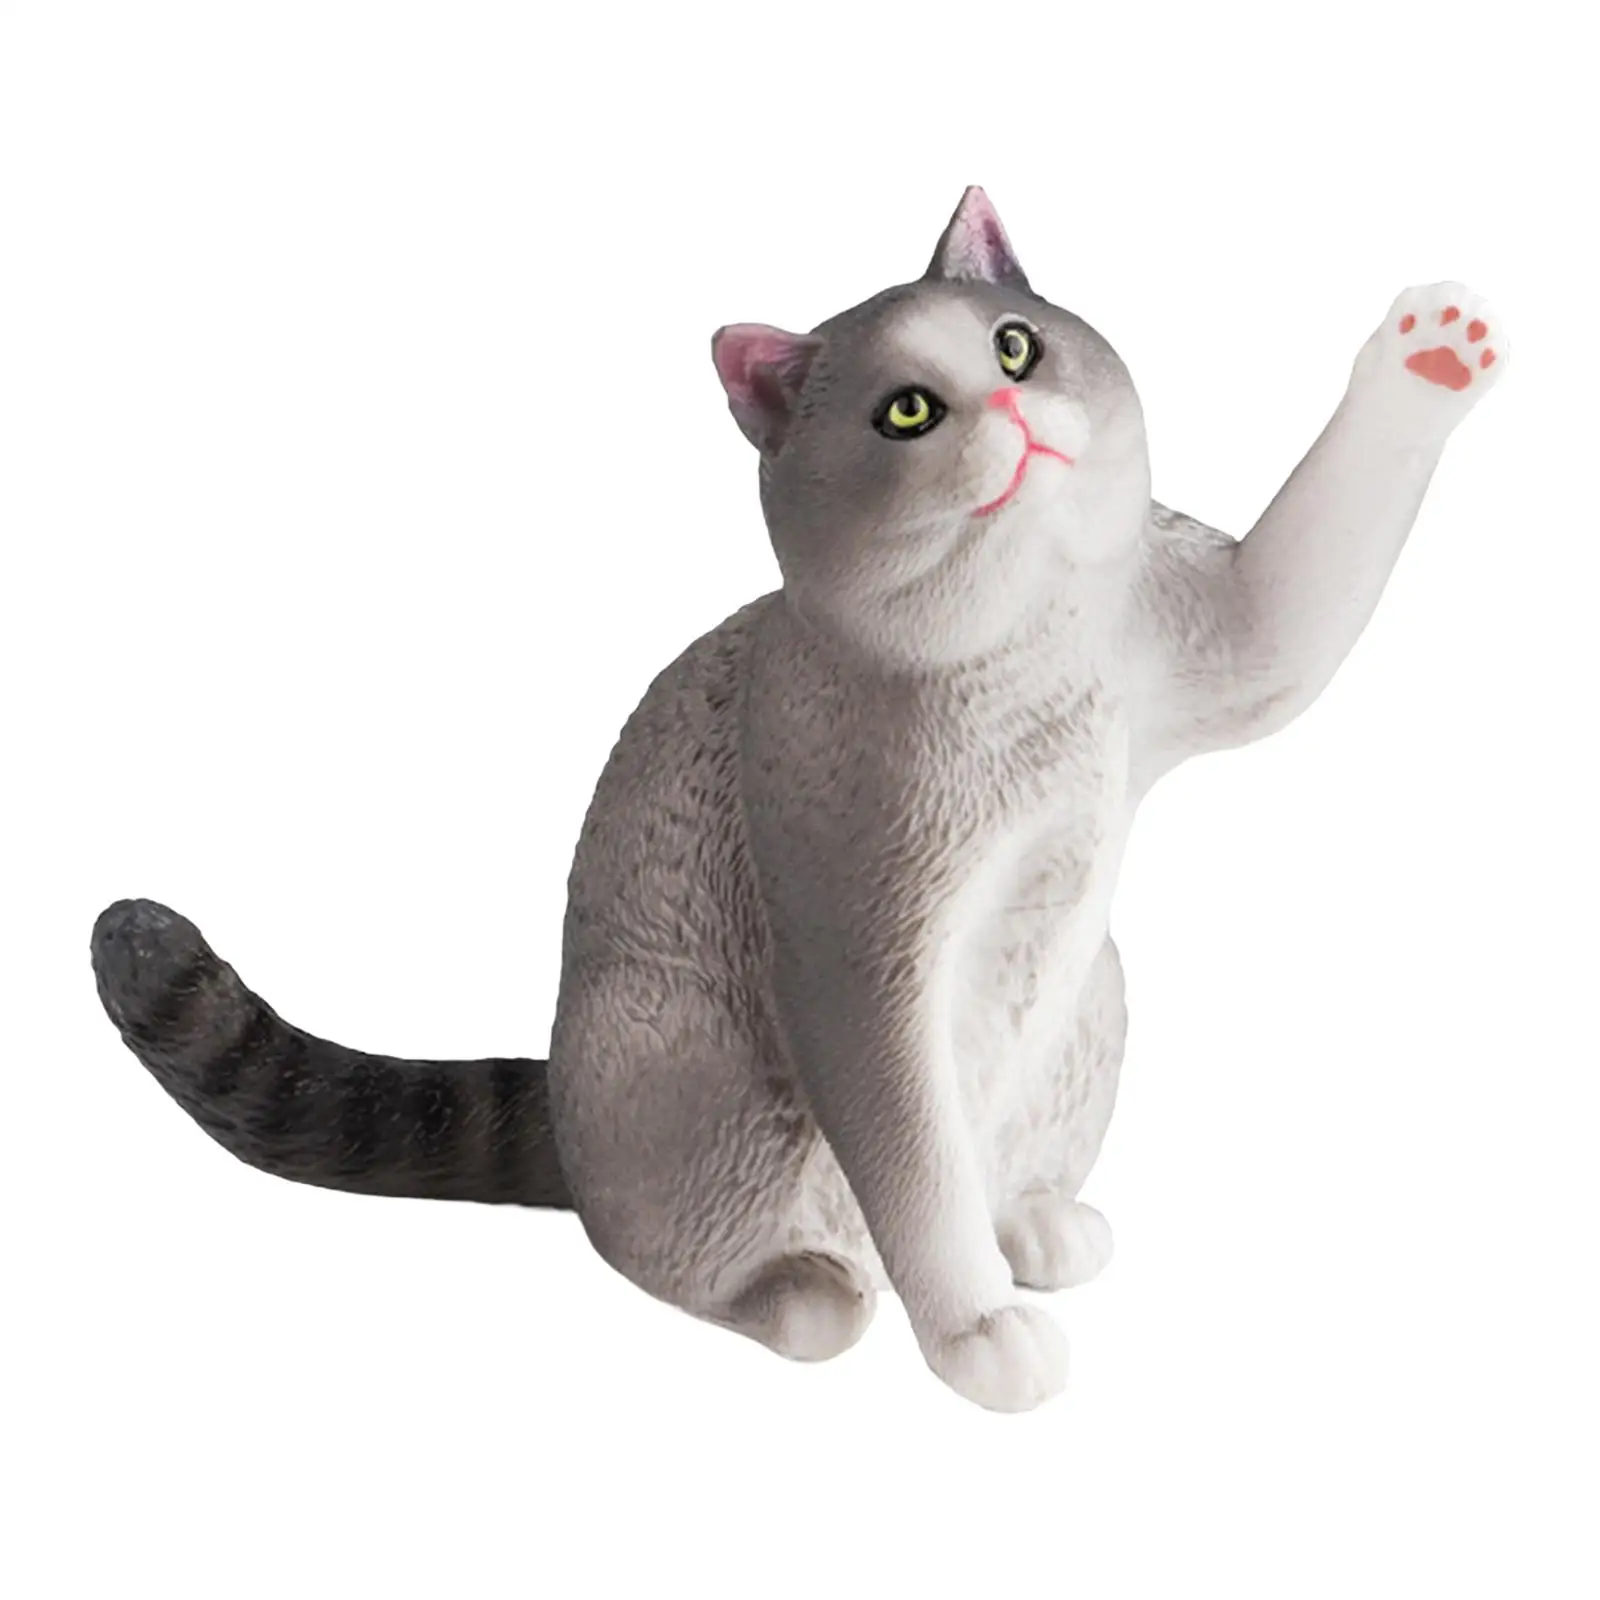 

Realistic Cat Animal Figure Model Small Cat Figurine Science Educational Toy for Toddlers Age 5 6 7 8 Years Old Kids Boys Gifts